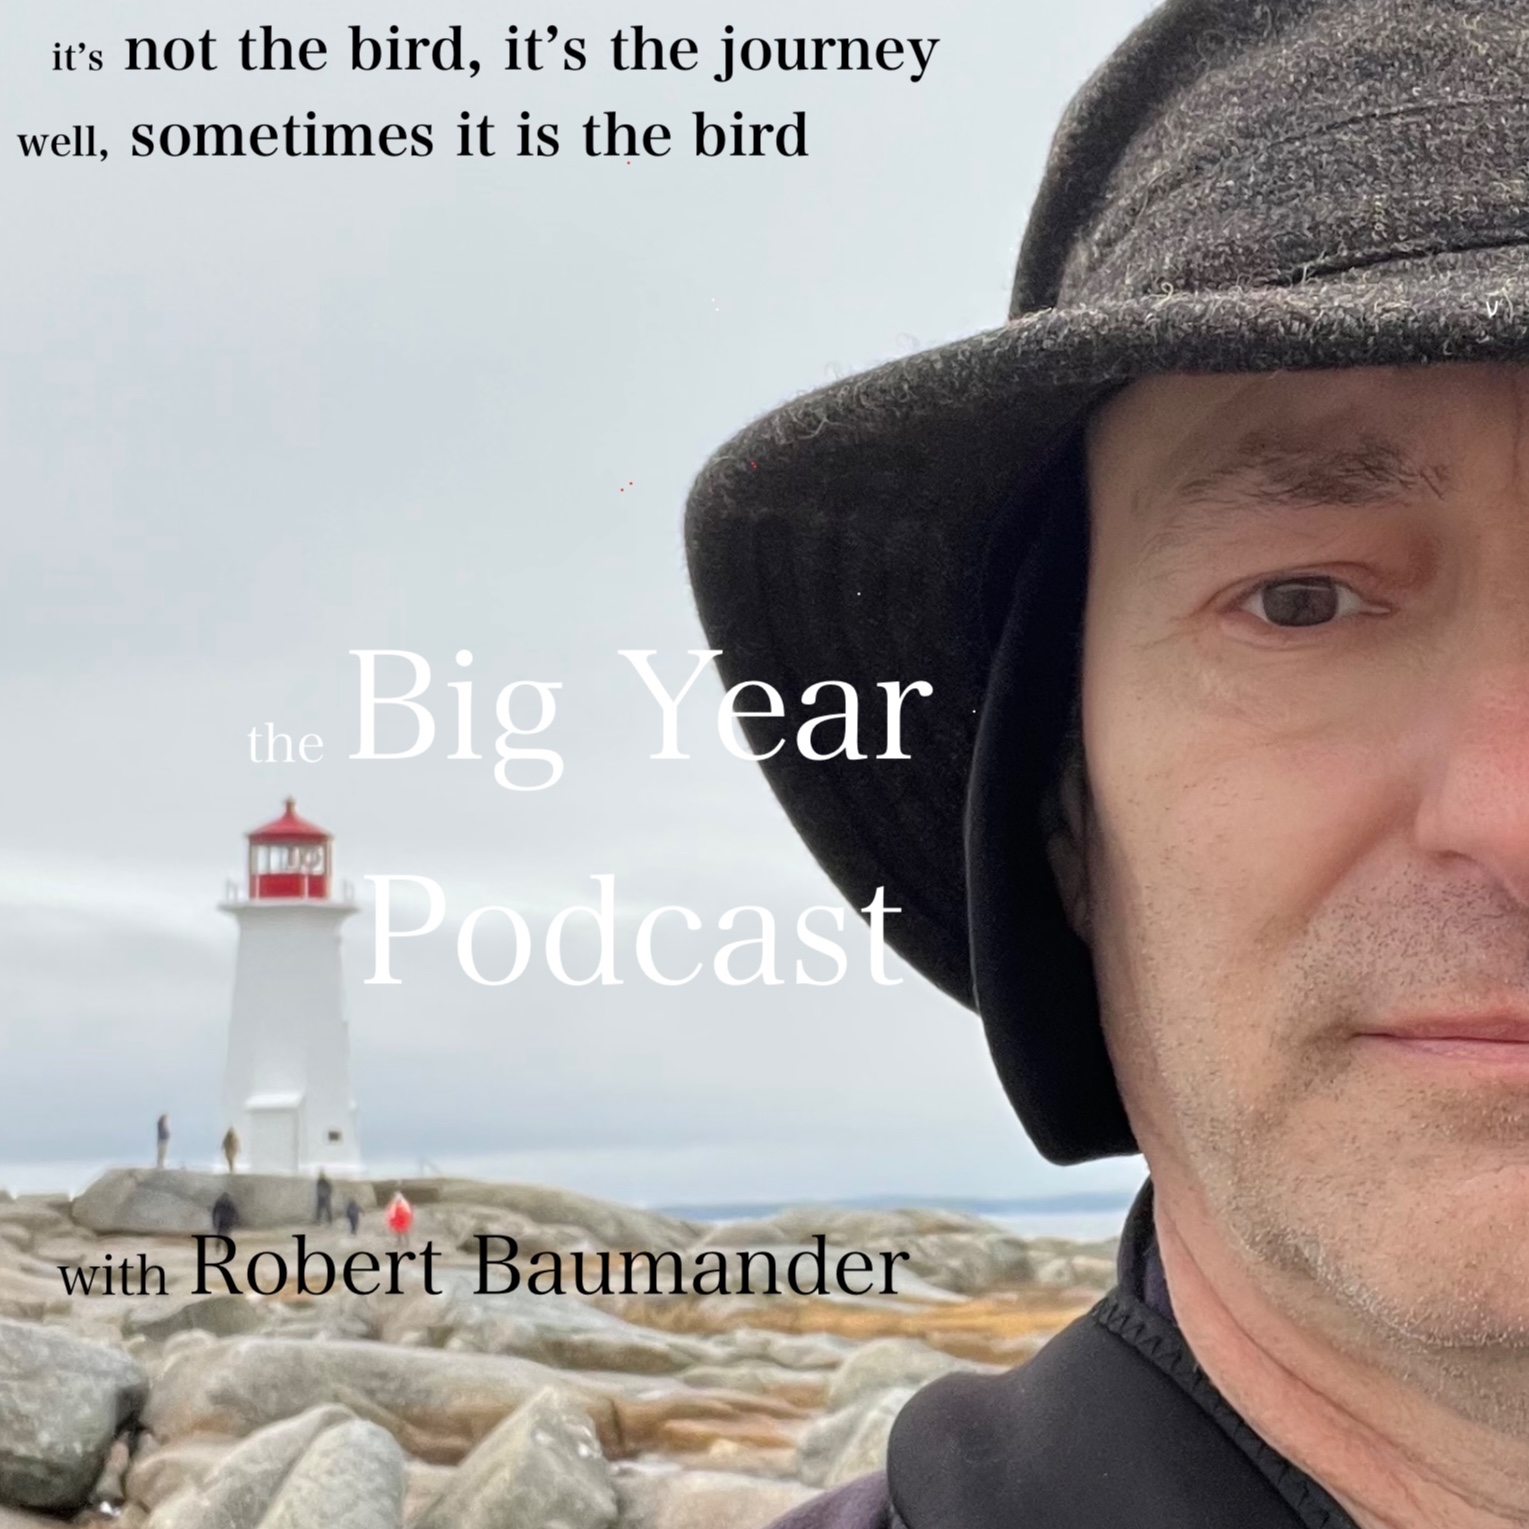 The Big Year Podcast